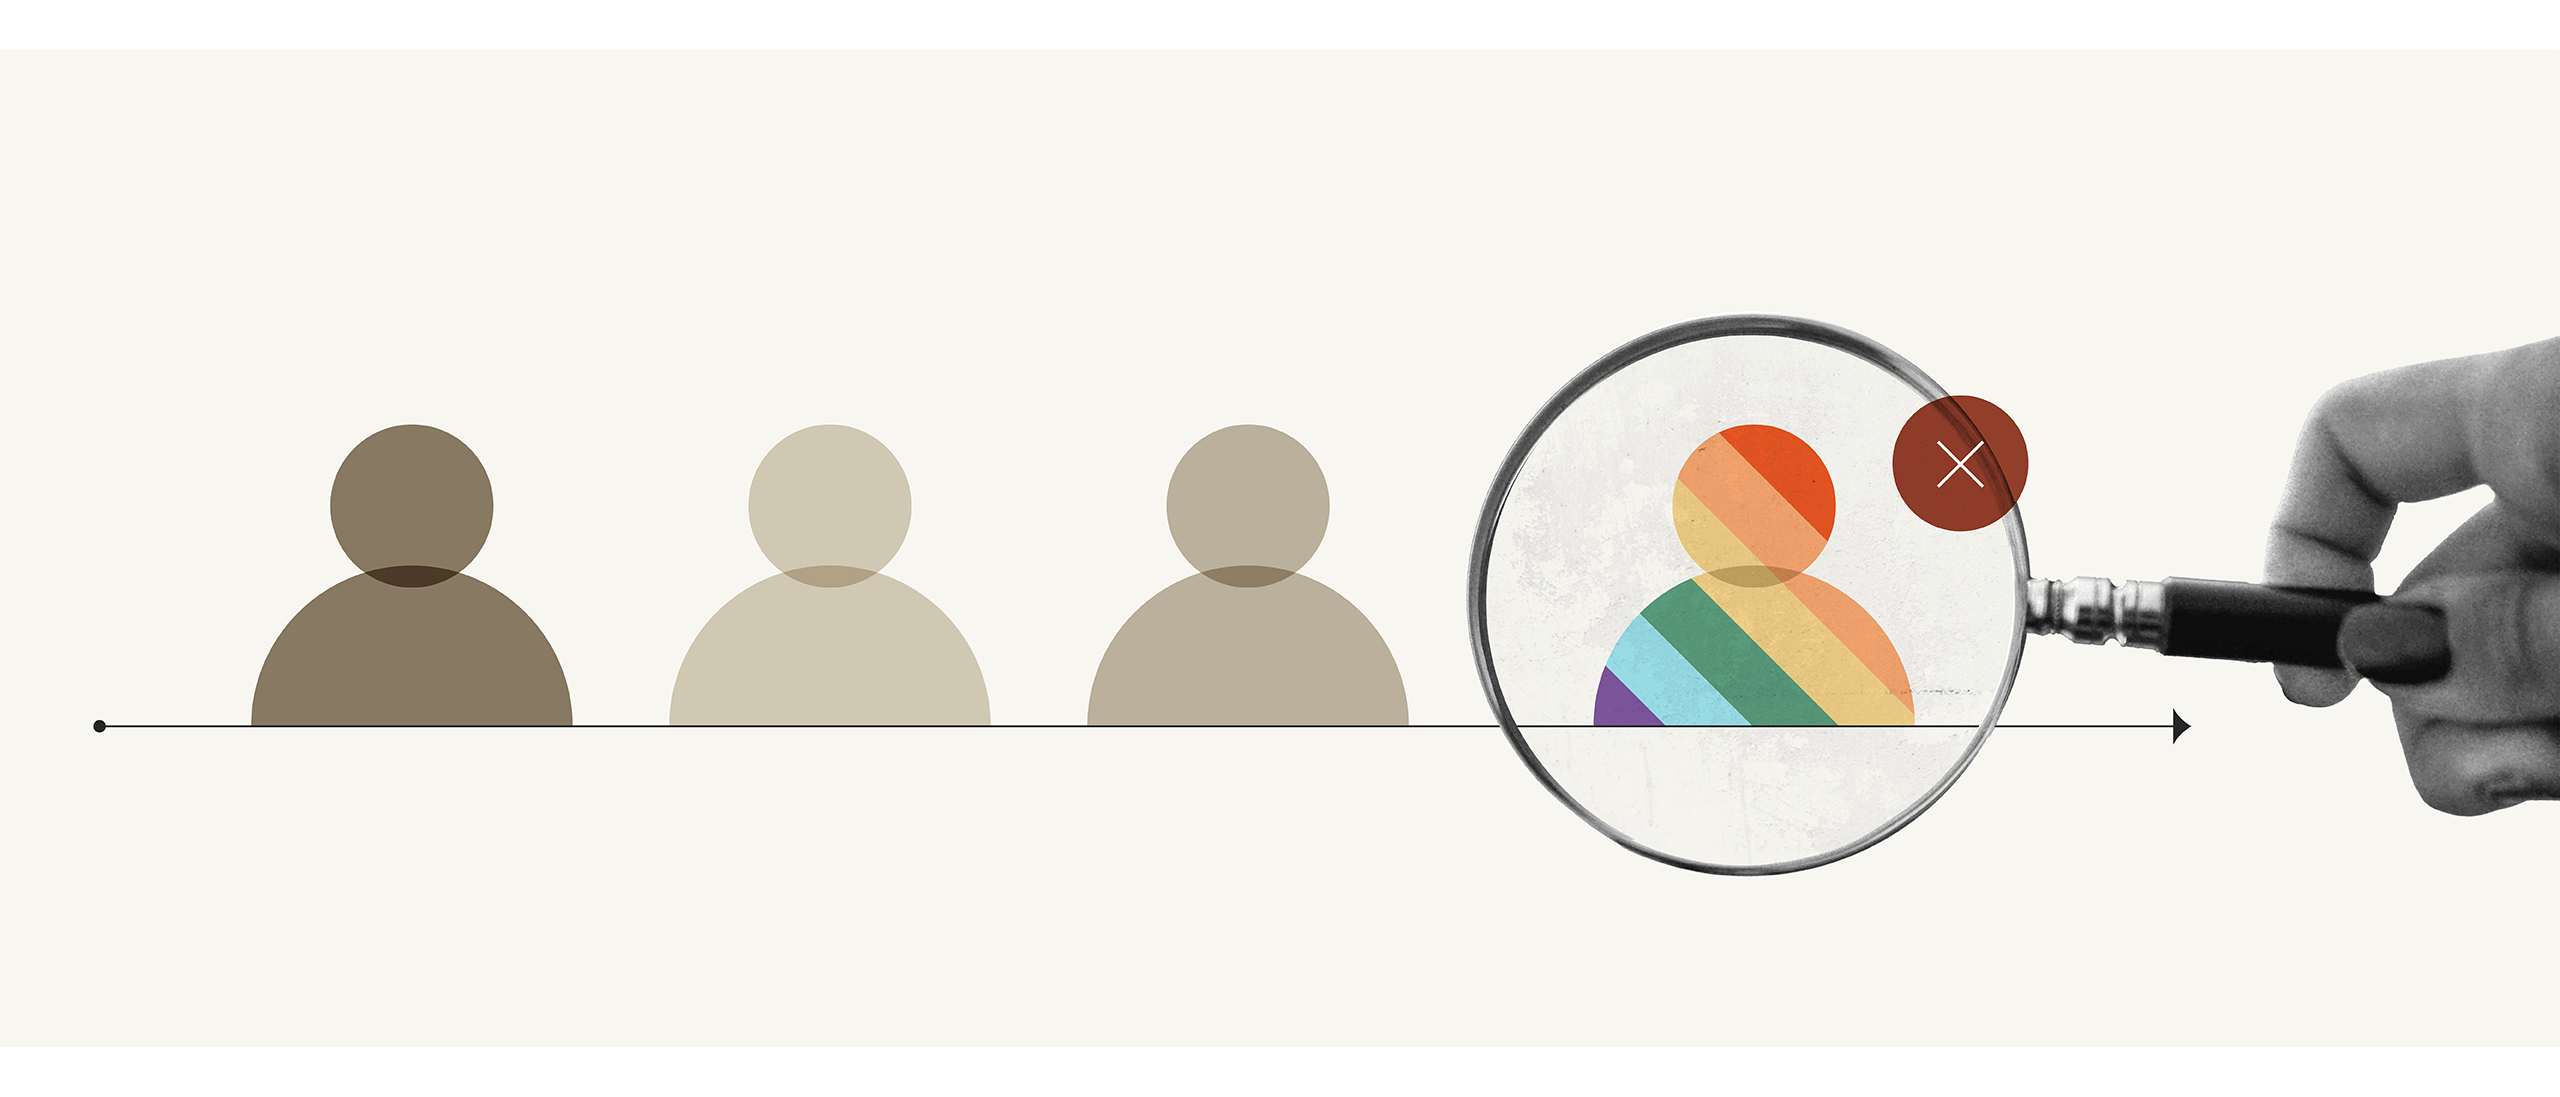 Blog post featured image for "5 Tips to Prevent Anti-LGBTQ+ Employment Bias"